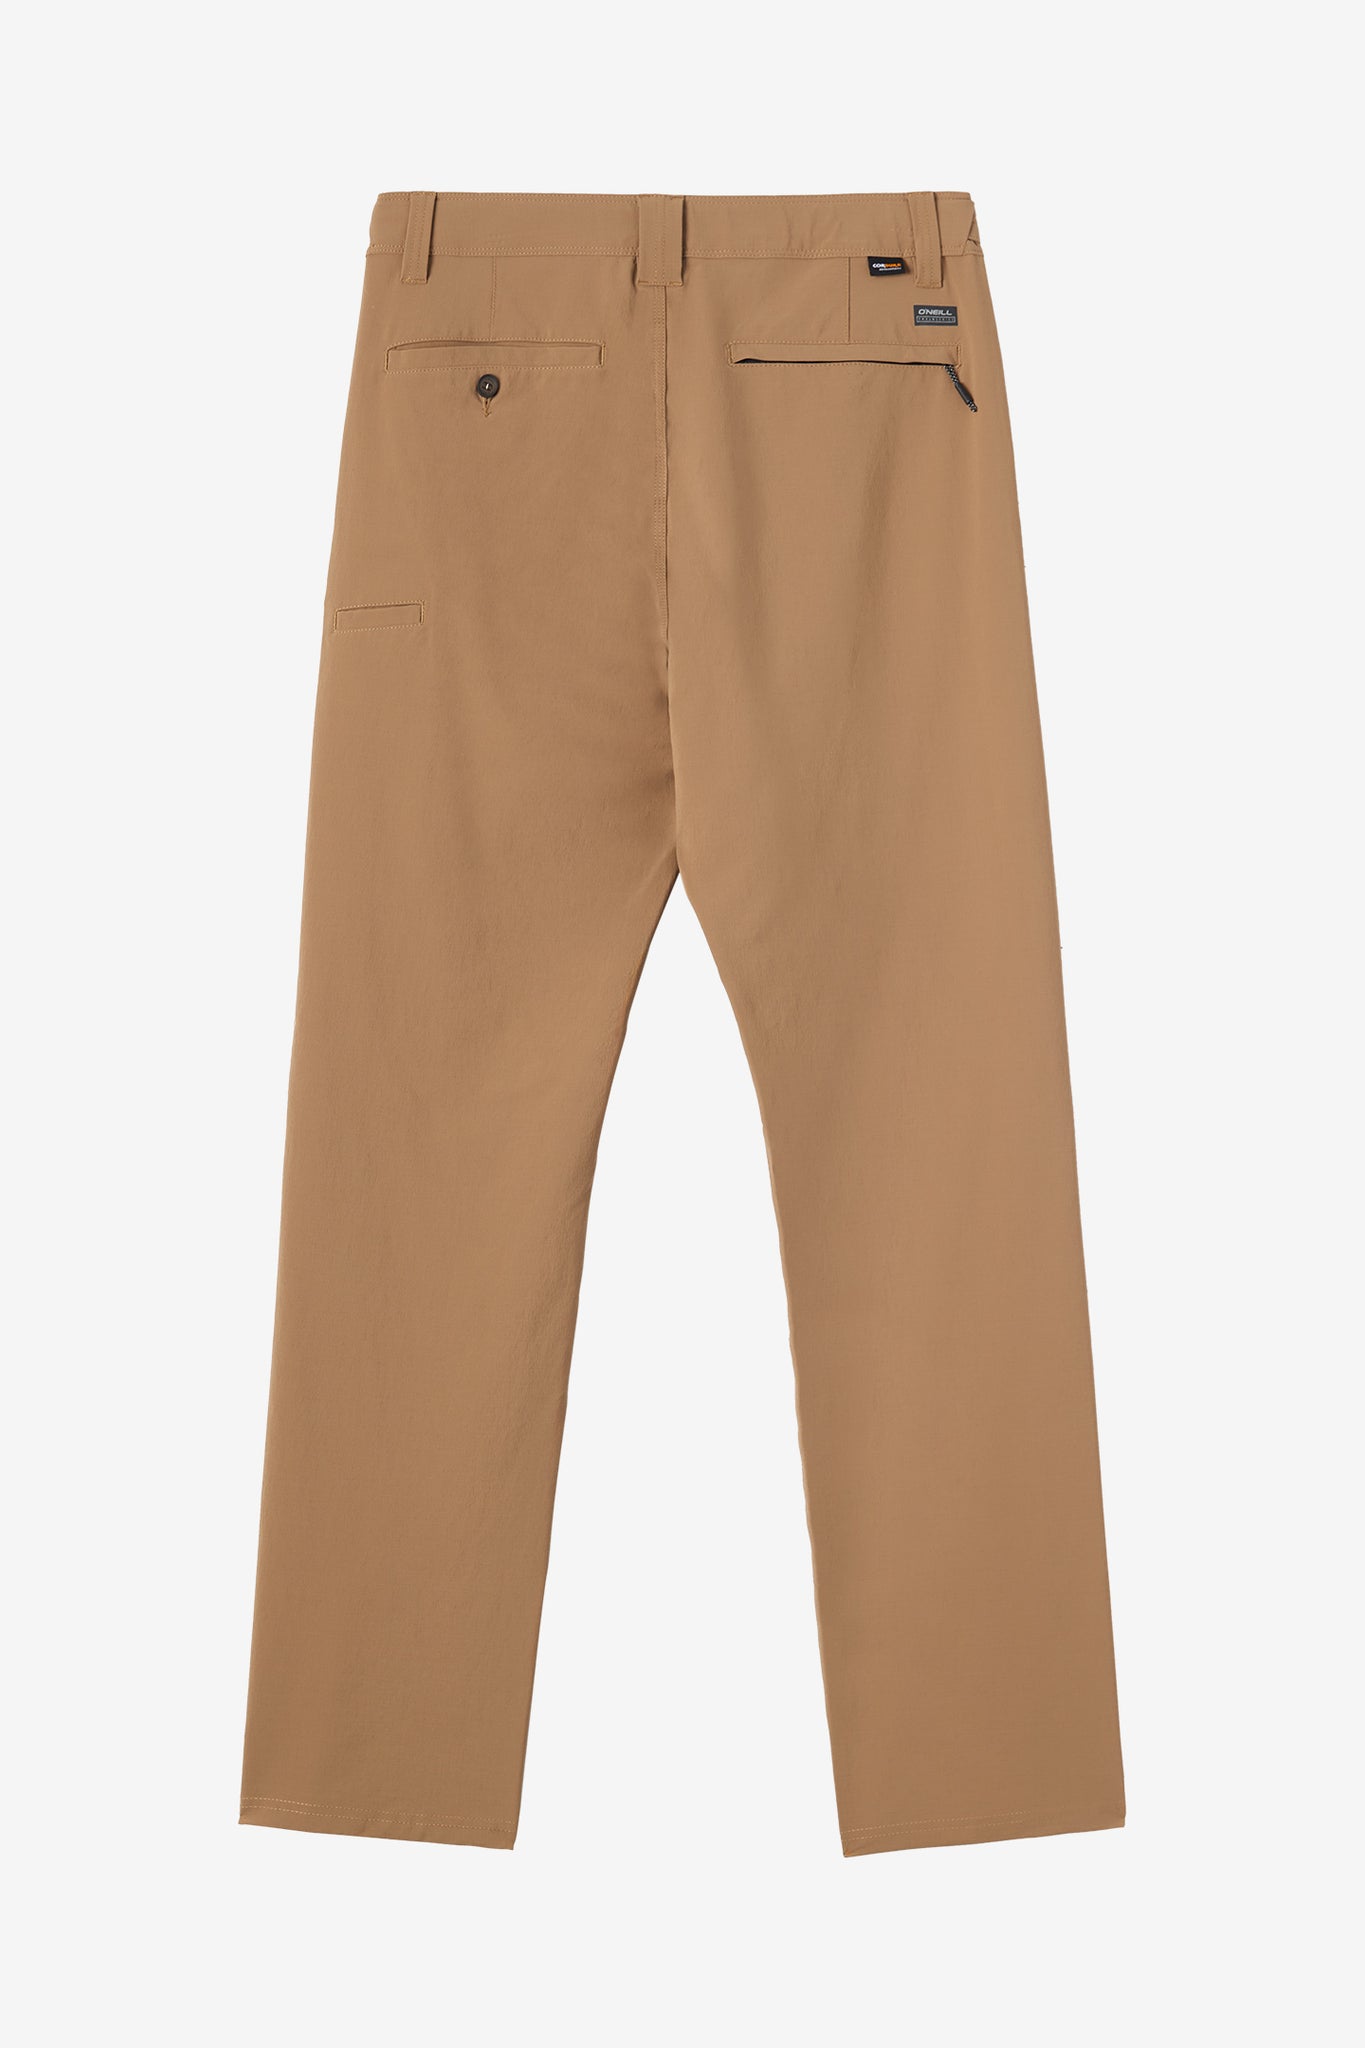 EAST CLIFF EXPEDITION HYBRID PANTS